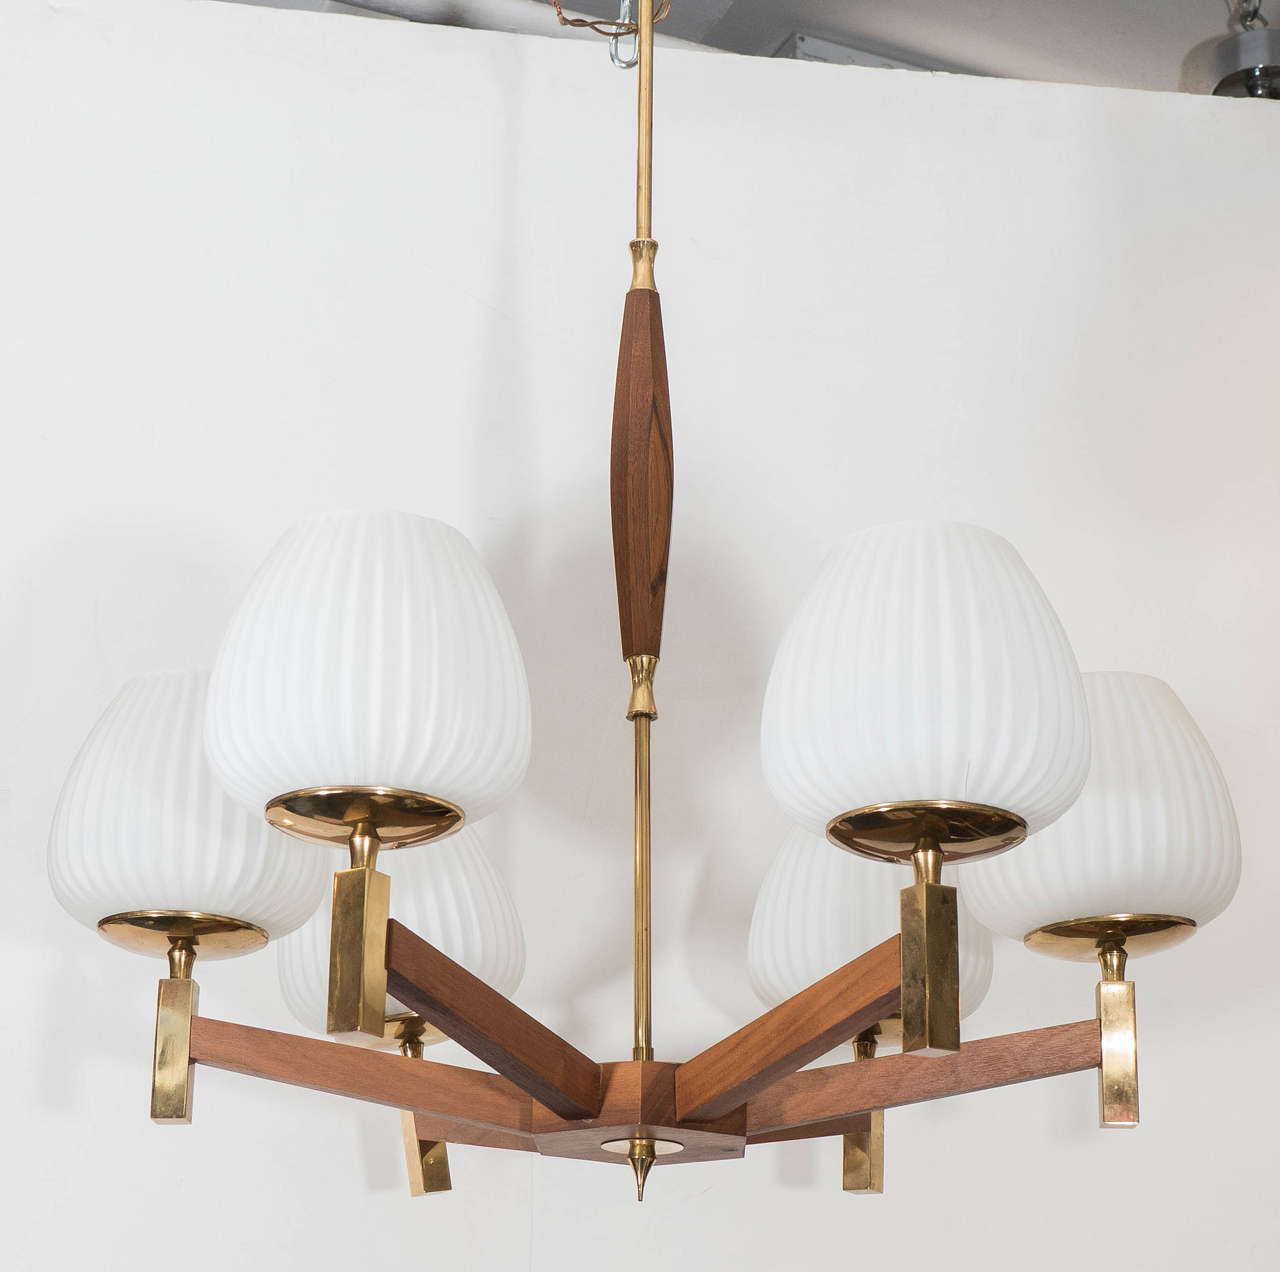 A Scandinavian six-arm chandelier, in the Danish style, with suspending rod and decorative accents in polished brass, each arm supporting a ridged tulip-form globe in milk glass. Very good condition, consistent with age and use.